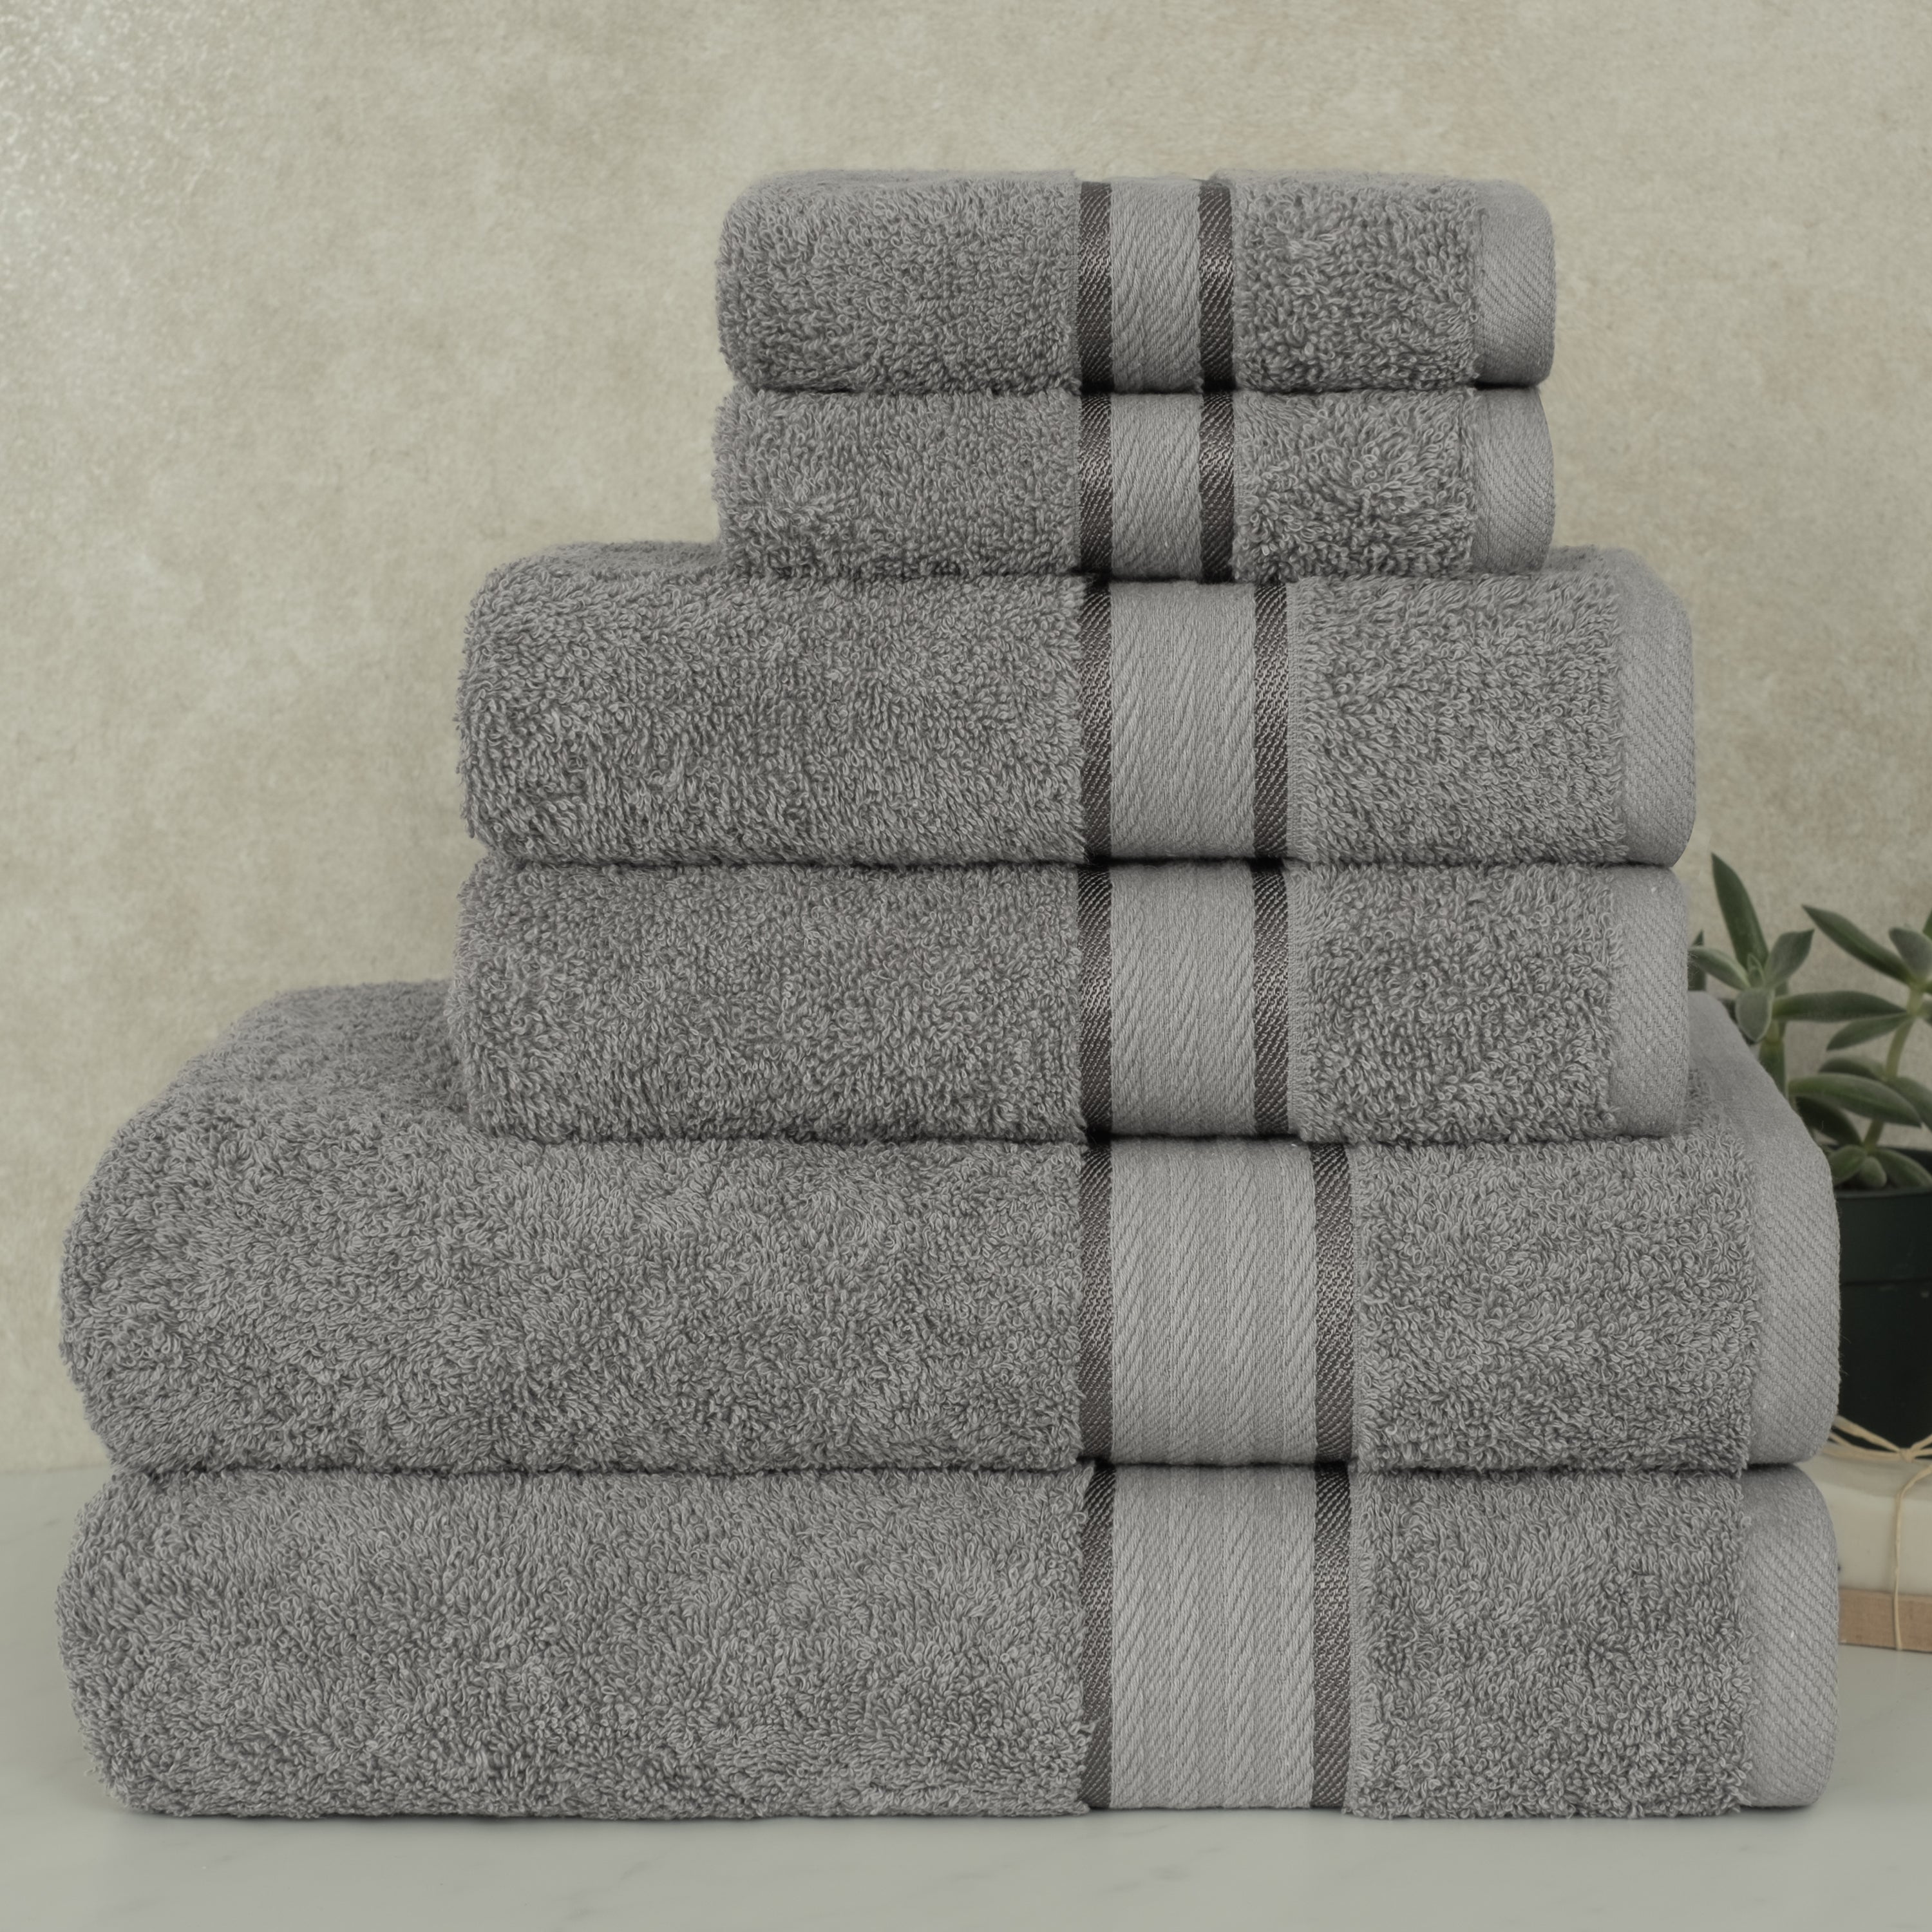 Homerican 100% Turkish cotton 6 Pieces Luxury Towel Sets for